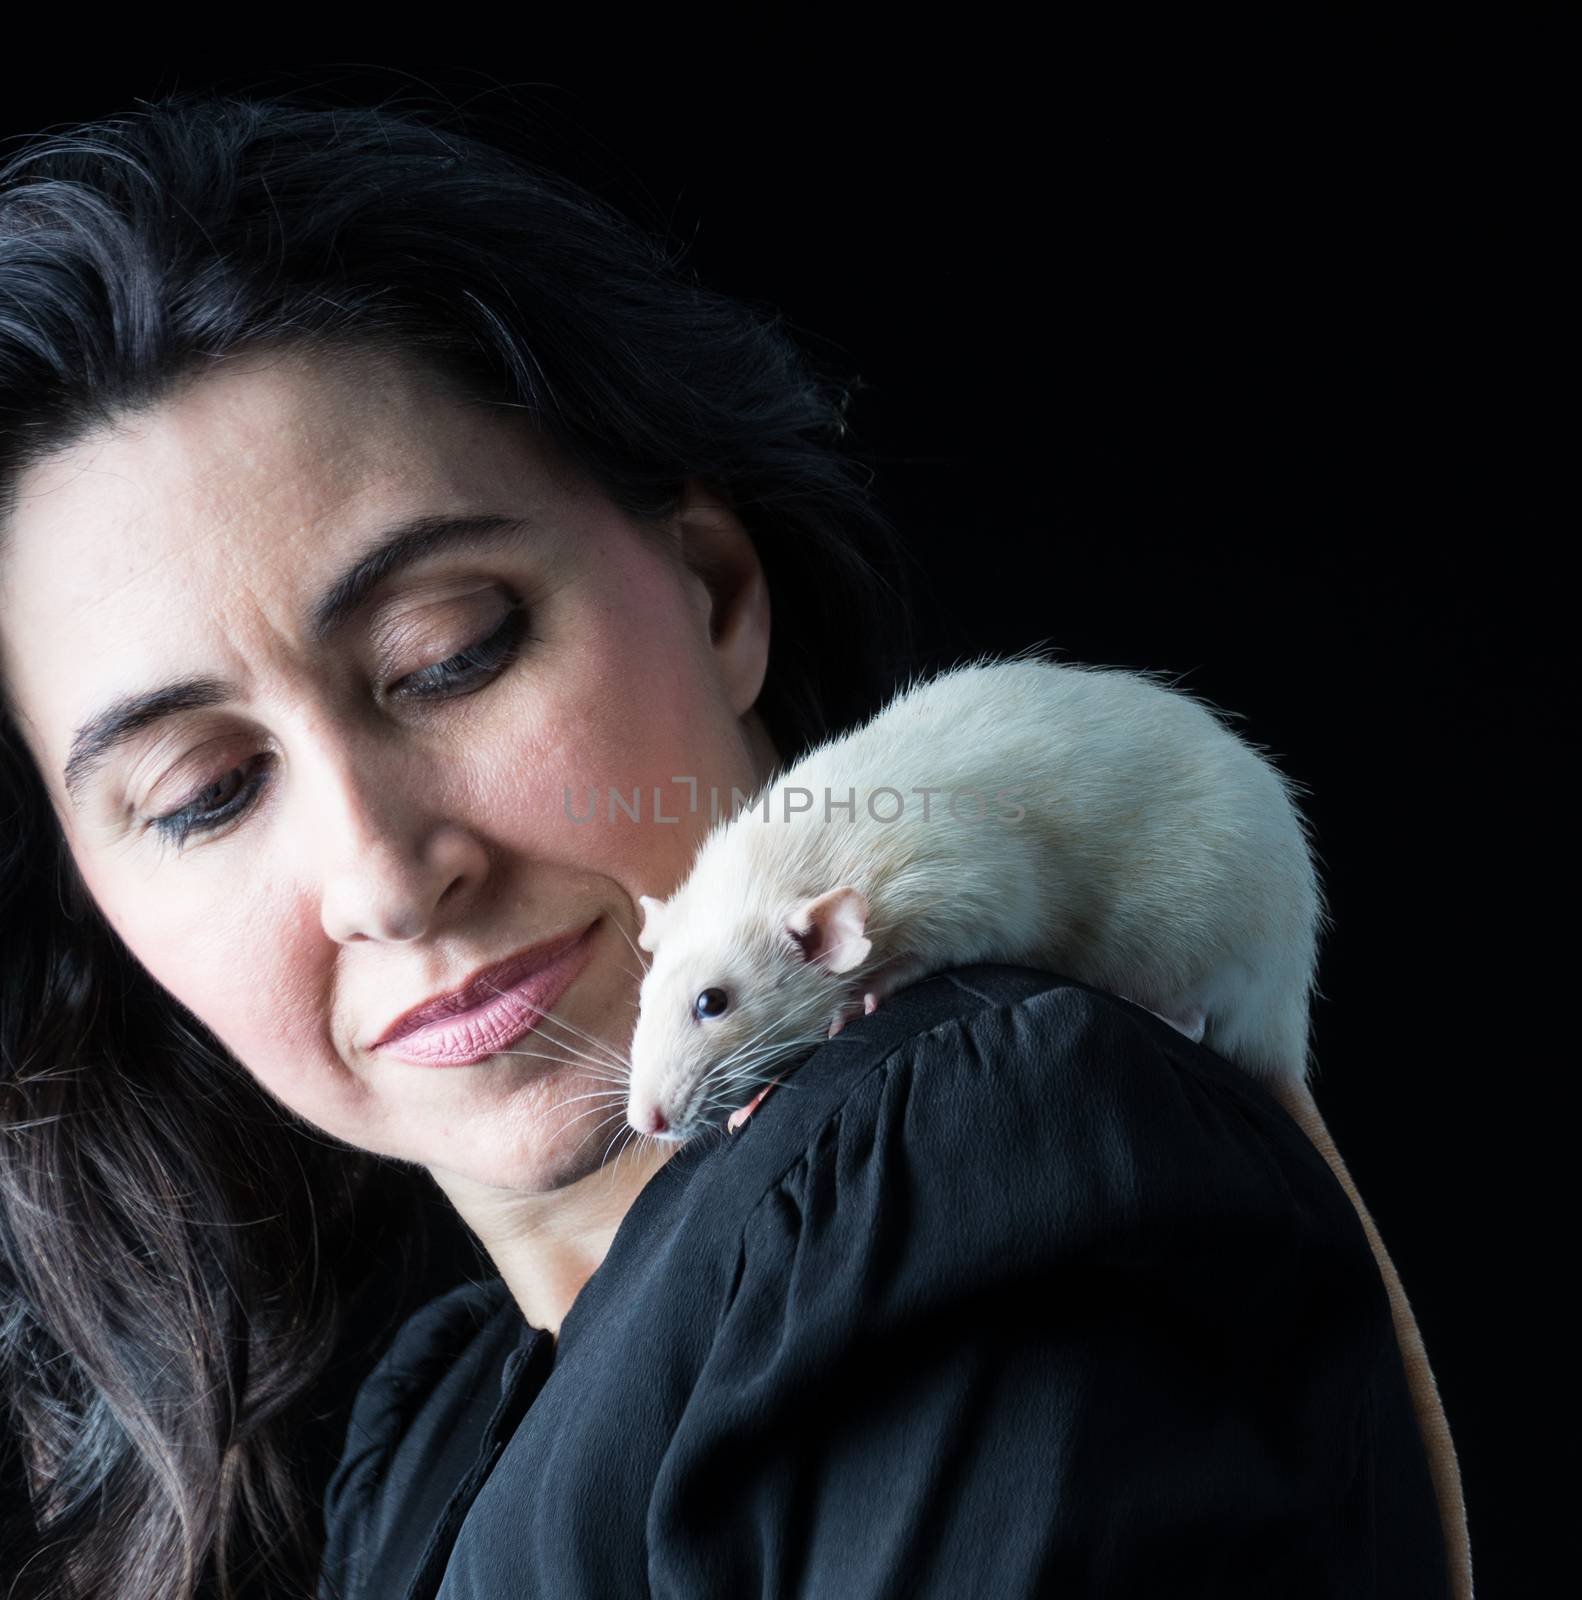 Woman in black standing in front of a black backdrop with a white dumbo rat perched on her shoulder.